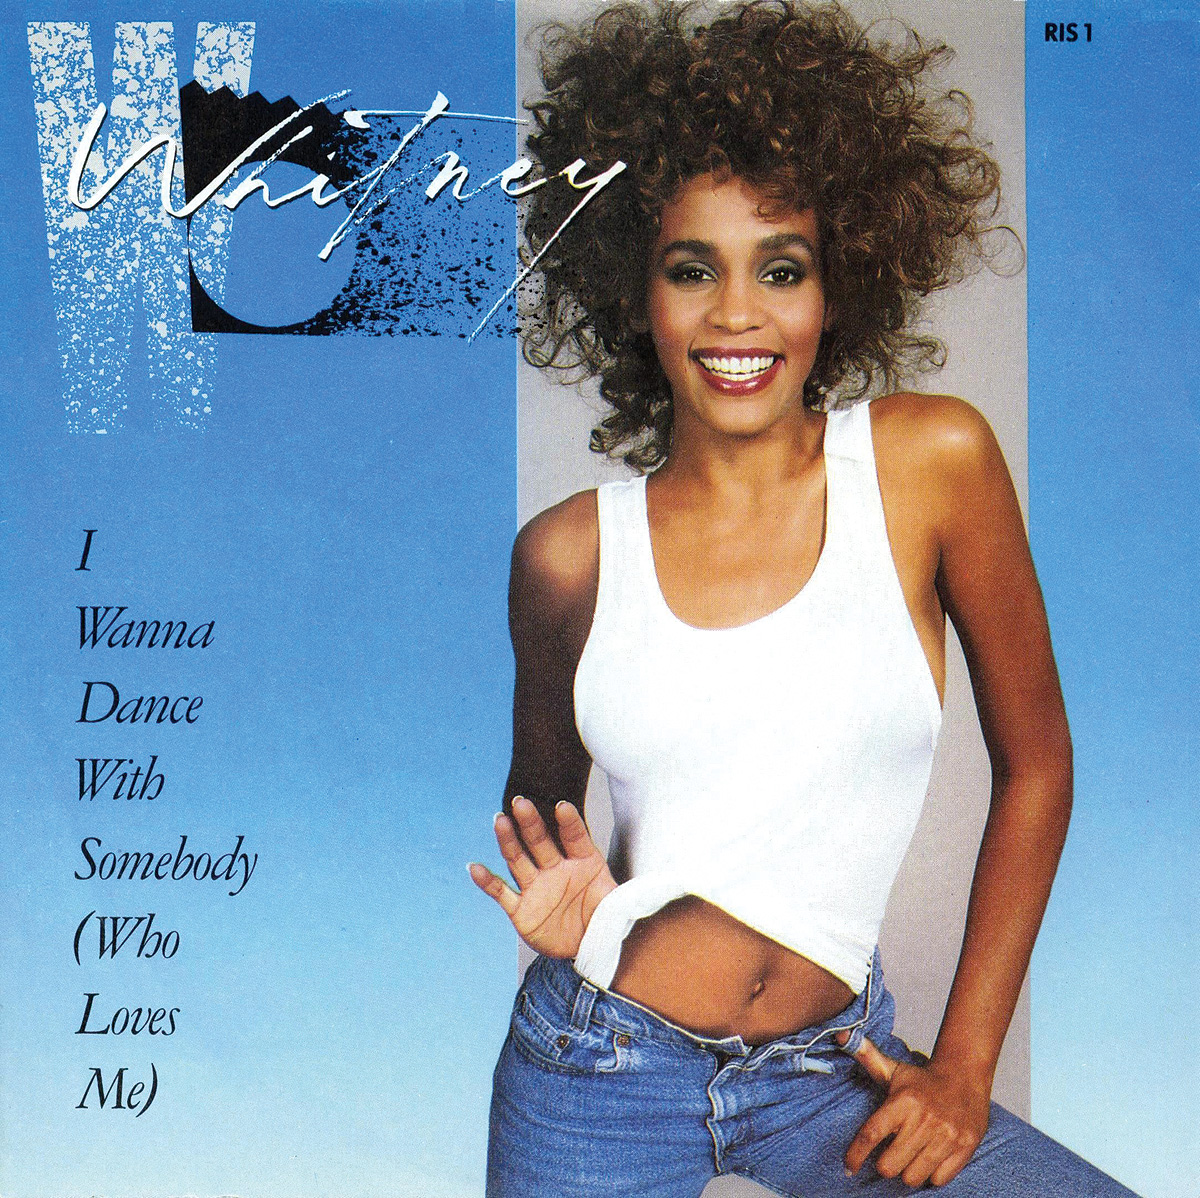 Release “I Wanna Dance With Somebody (Who Loves Me)” by Whitney Houston